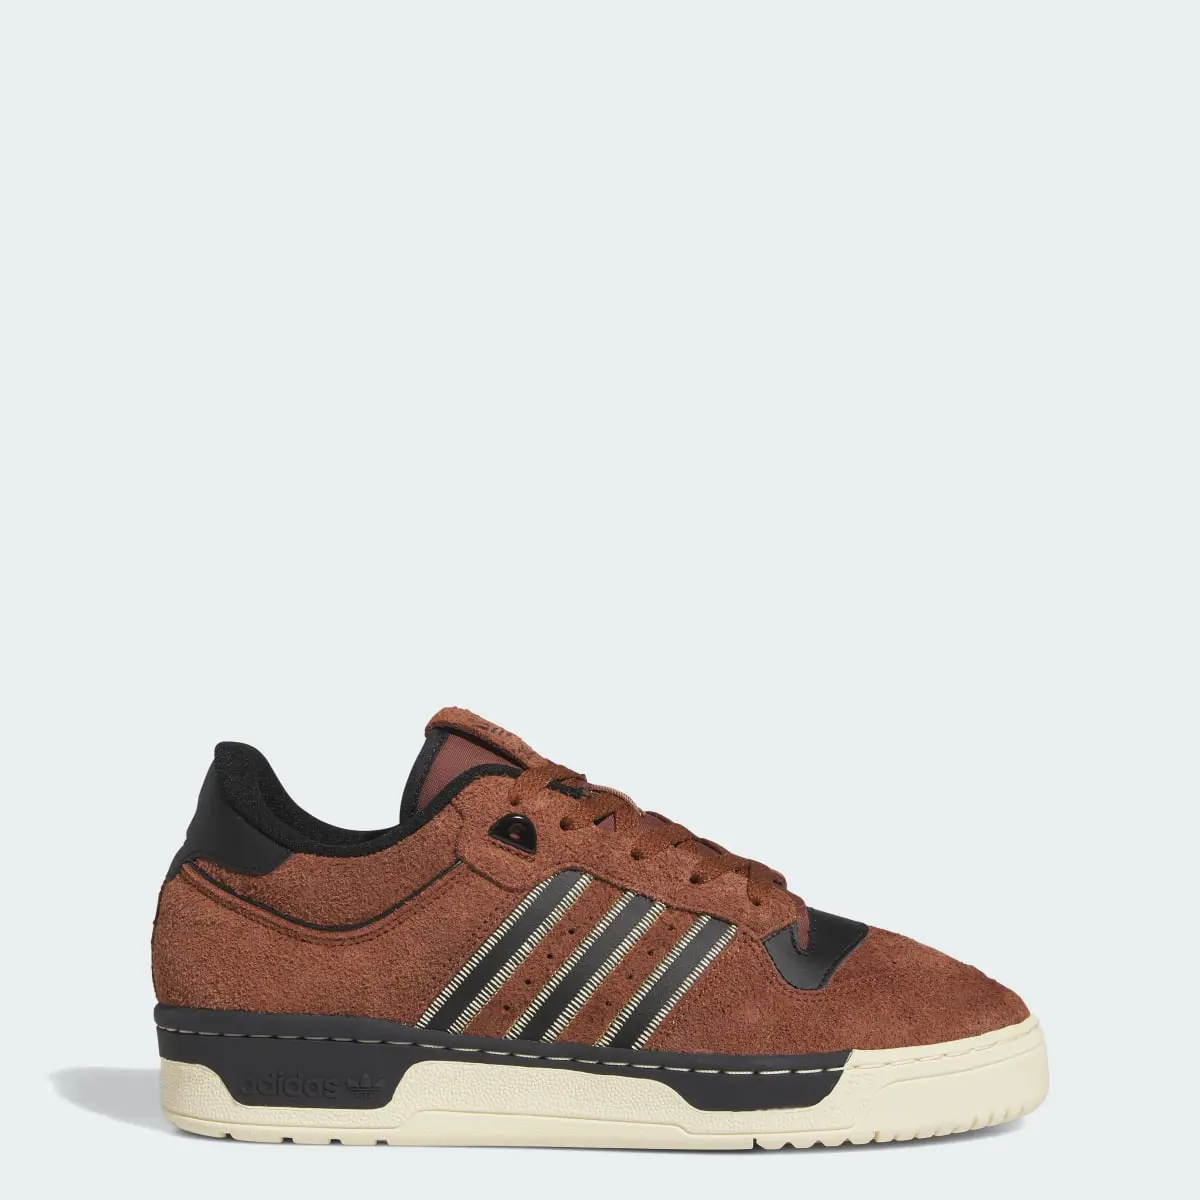 Adidas Chaussure Rivalry 86 Low. 1